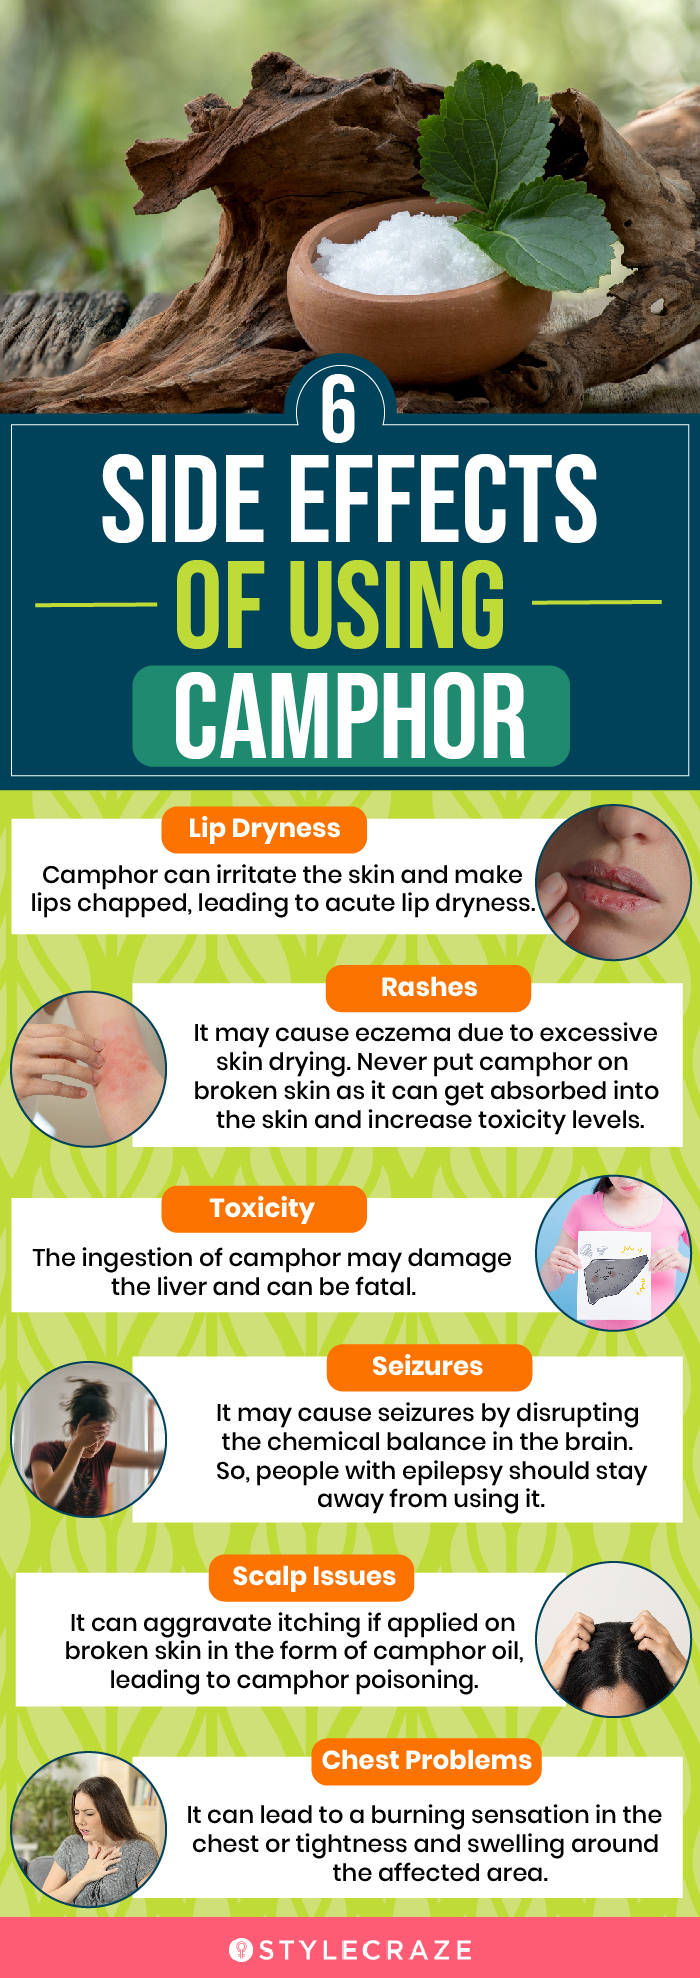 6 side effects of using camphor (infographic)